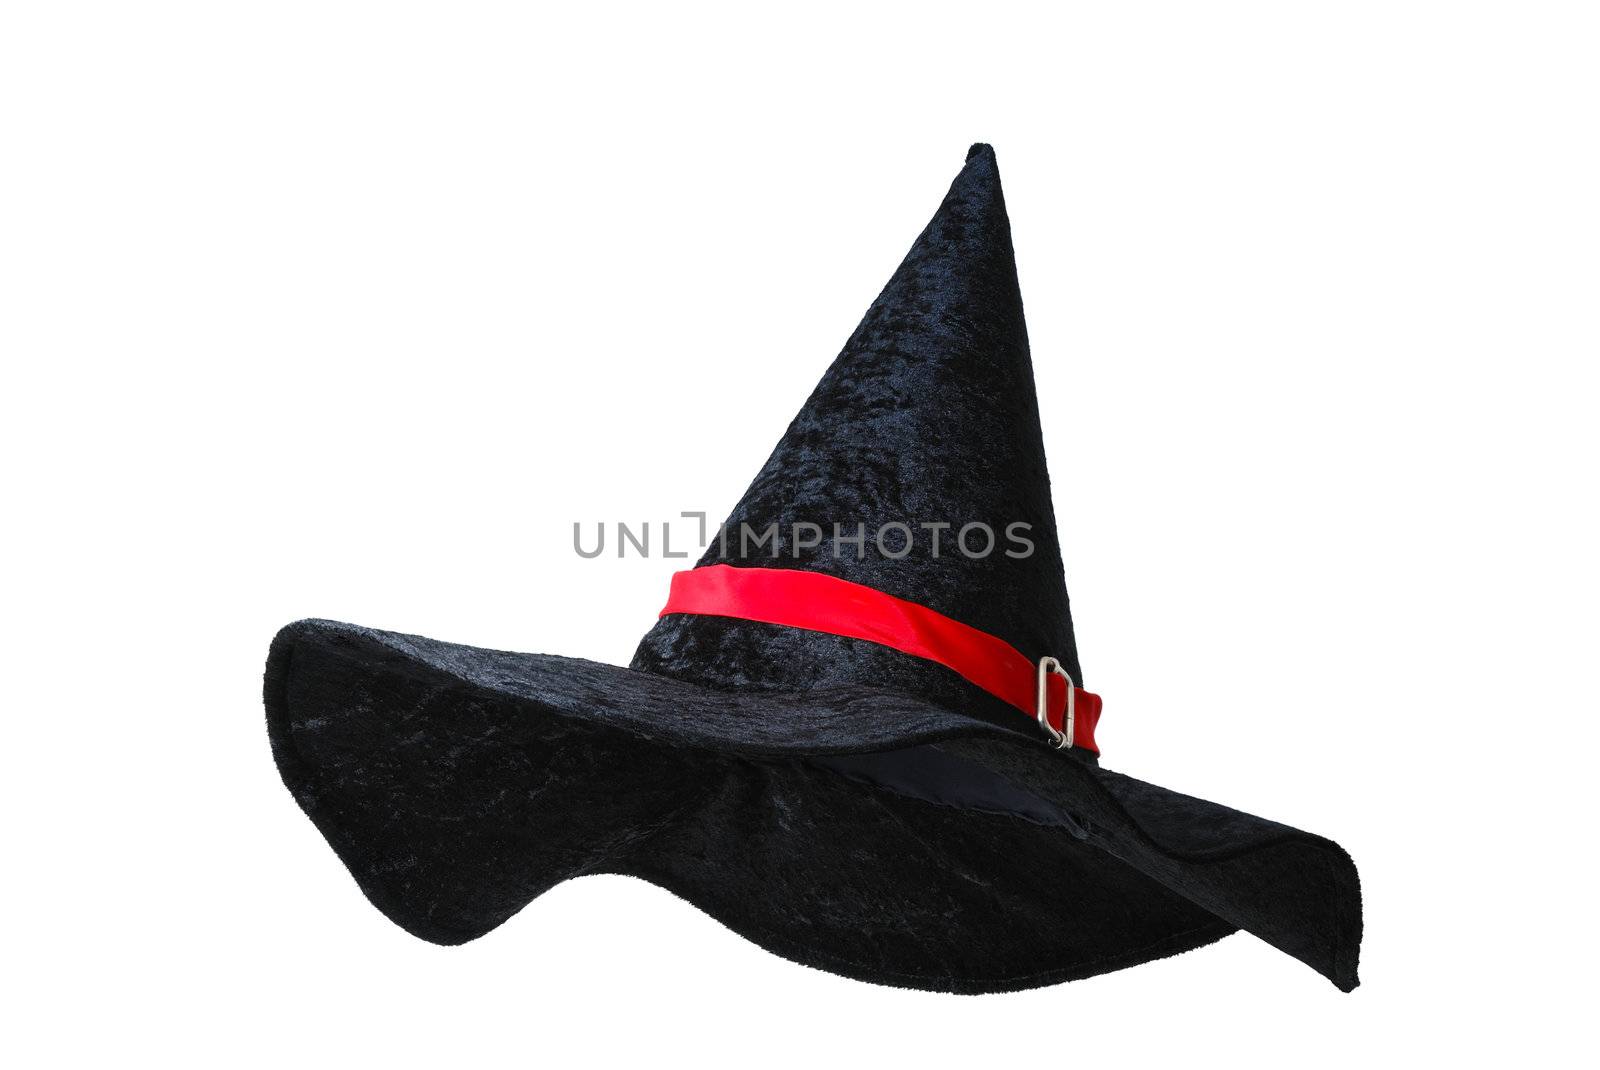 Black witch hat with red strip isolated on white background